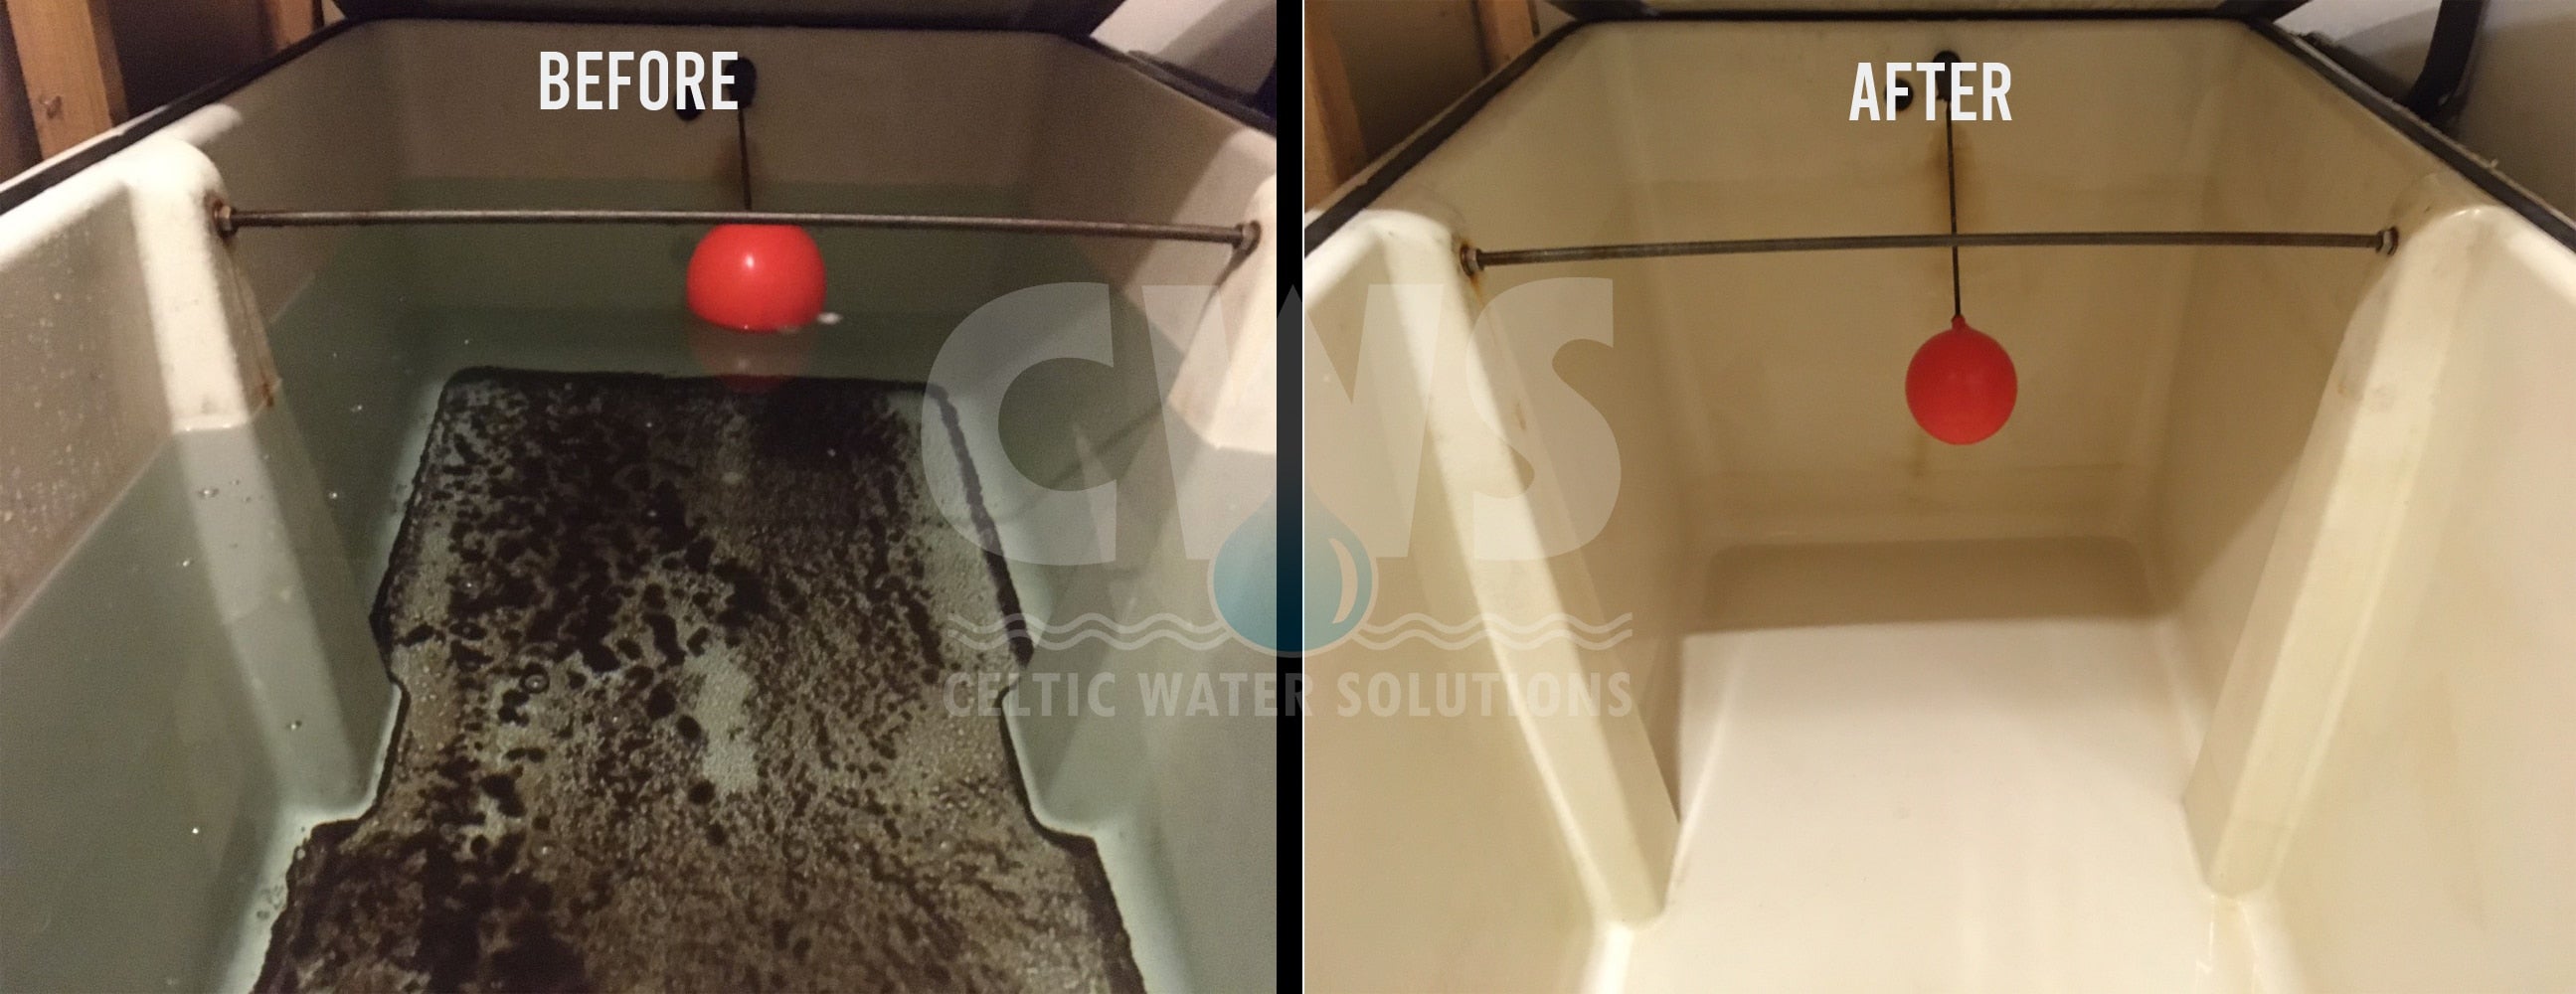 How To Clean Your Attic Water Tank Image Balcony and Attic